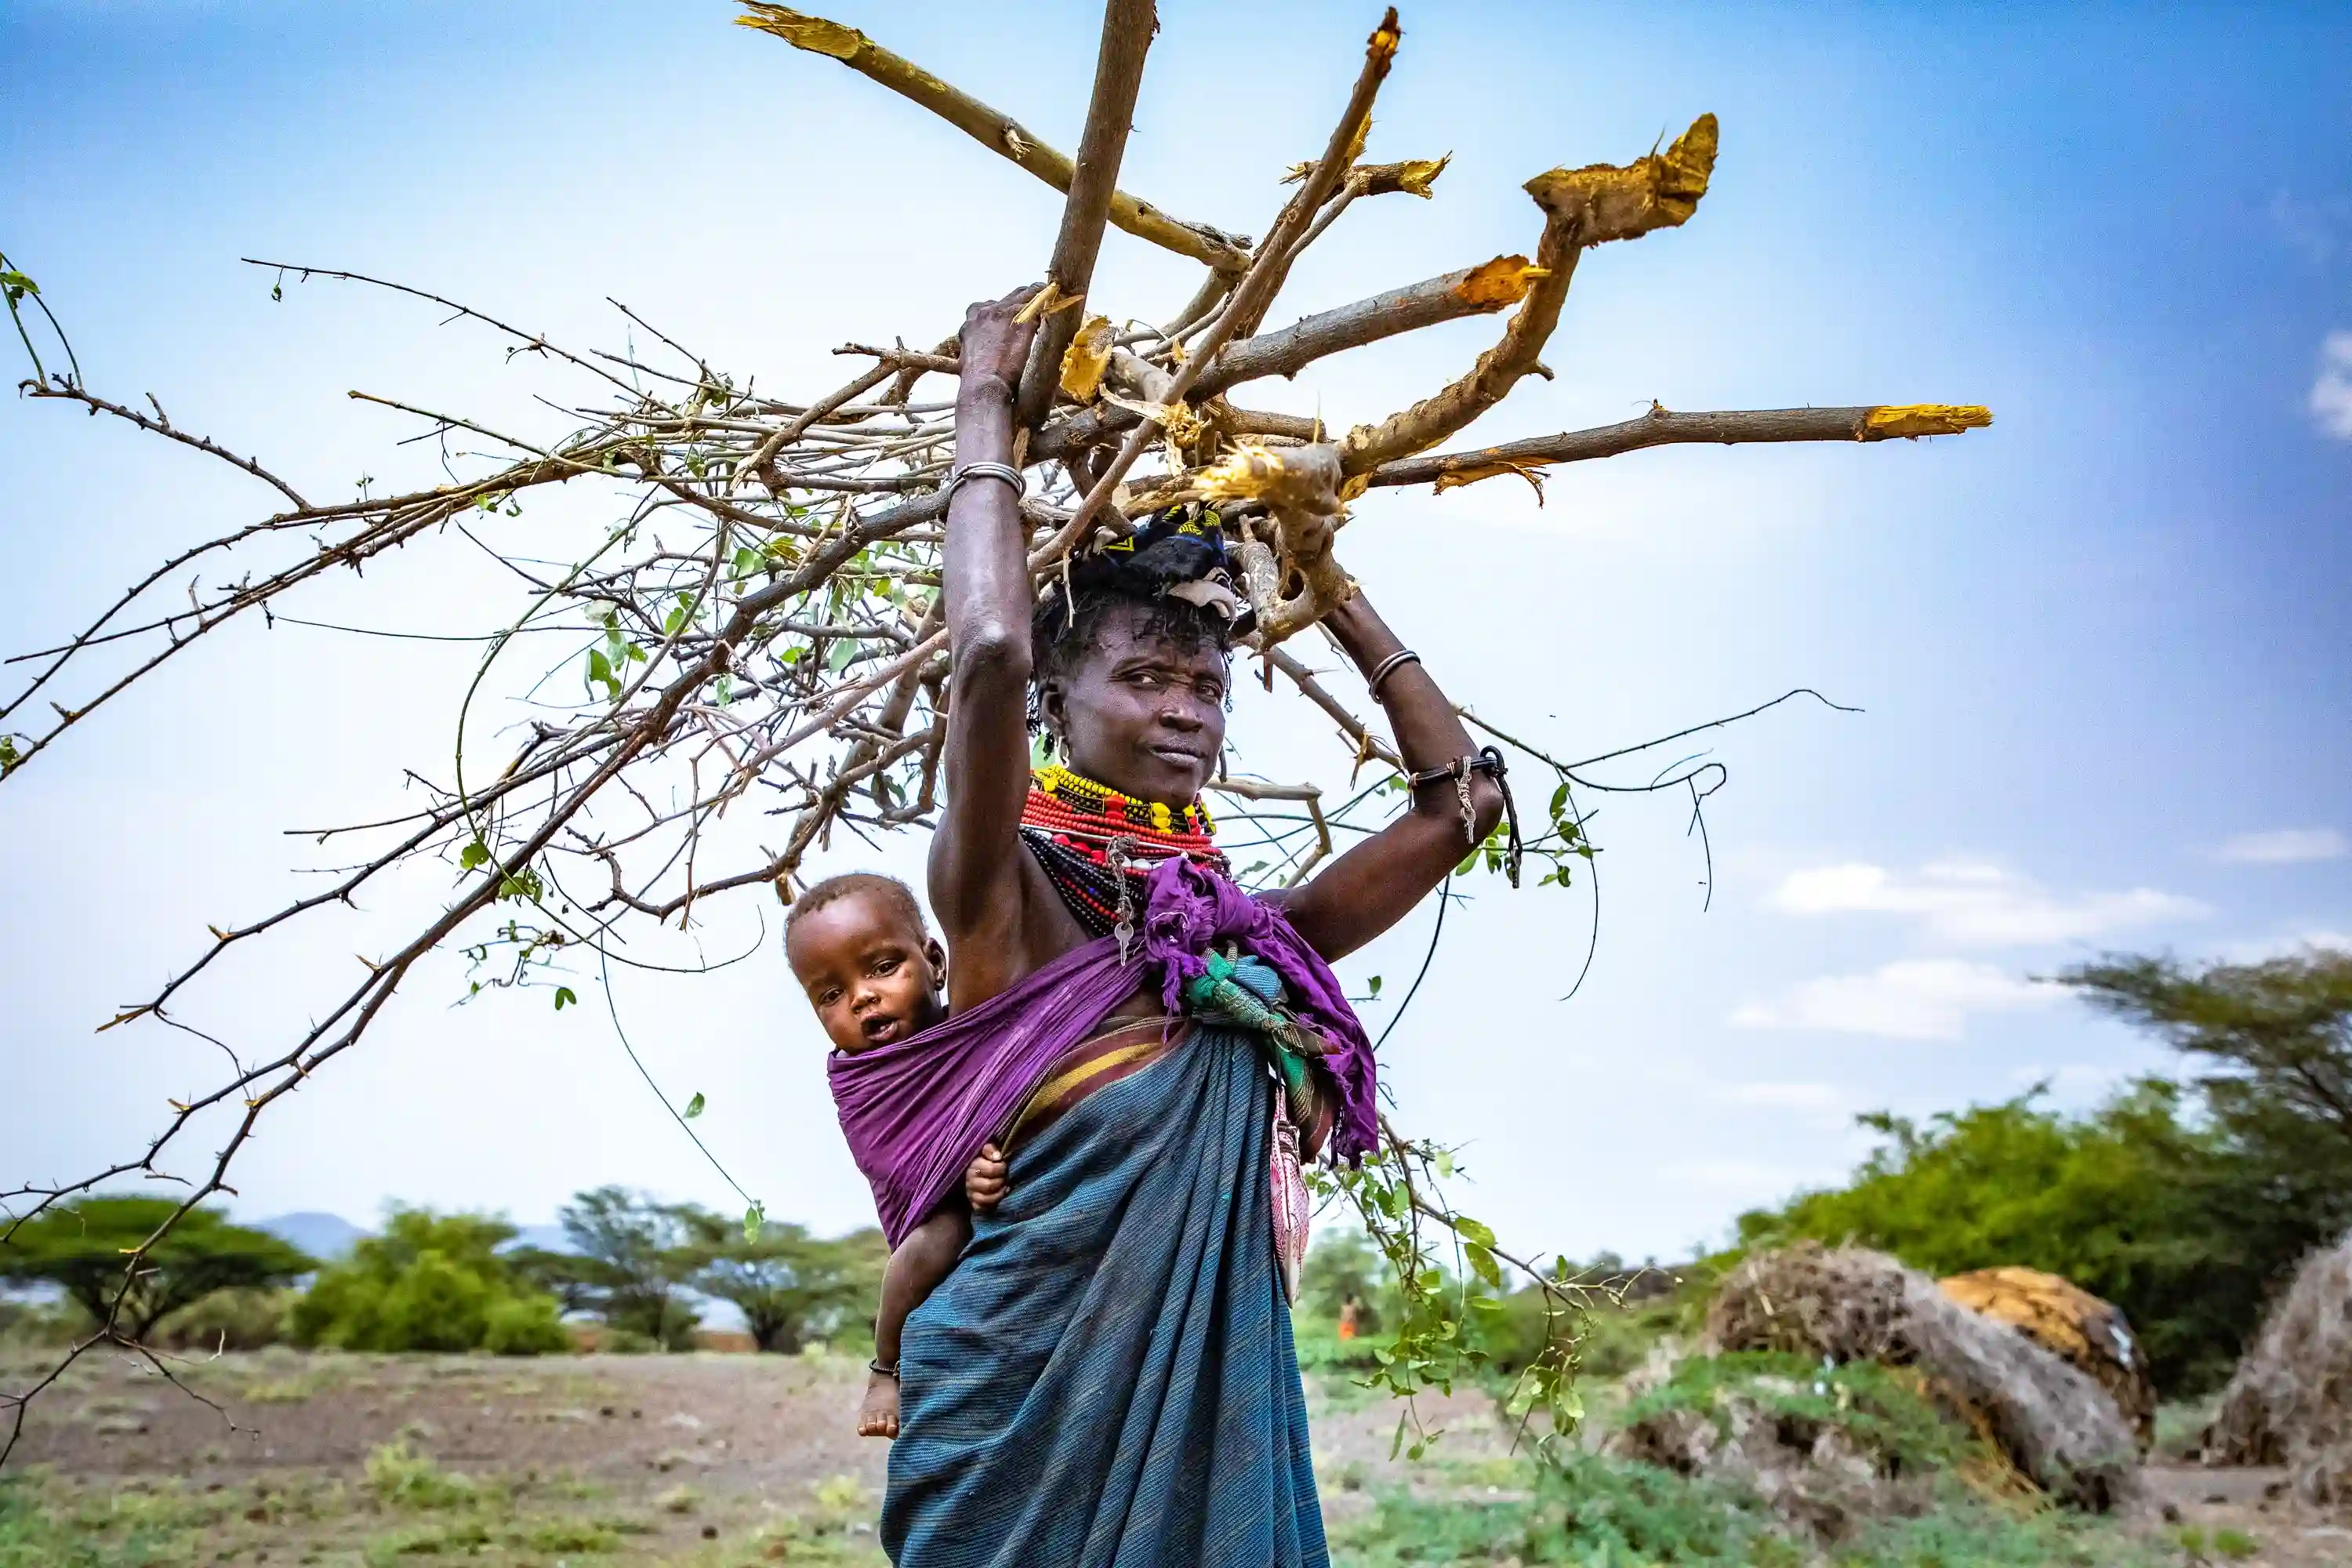 Atiir collects firewood every day to make money to feed her family.